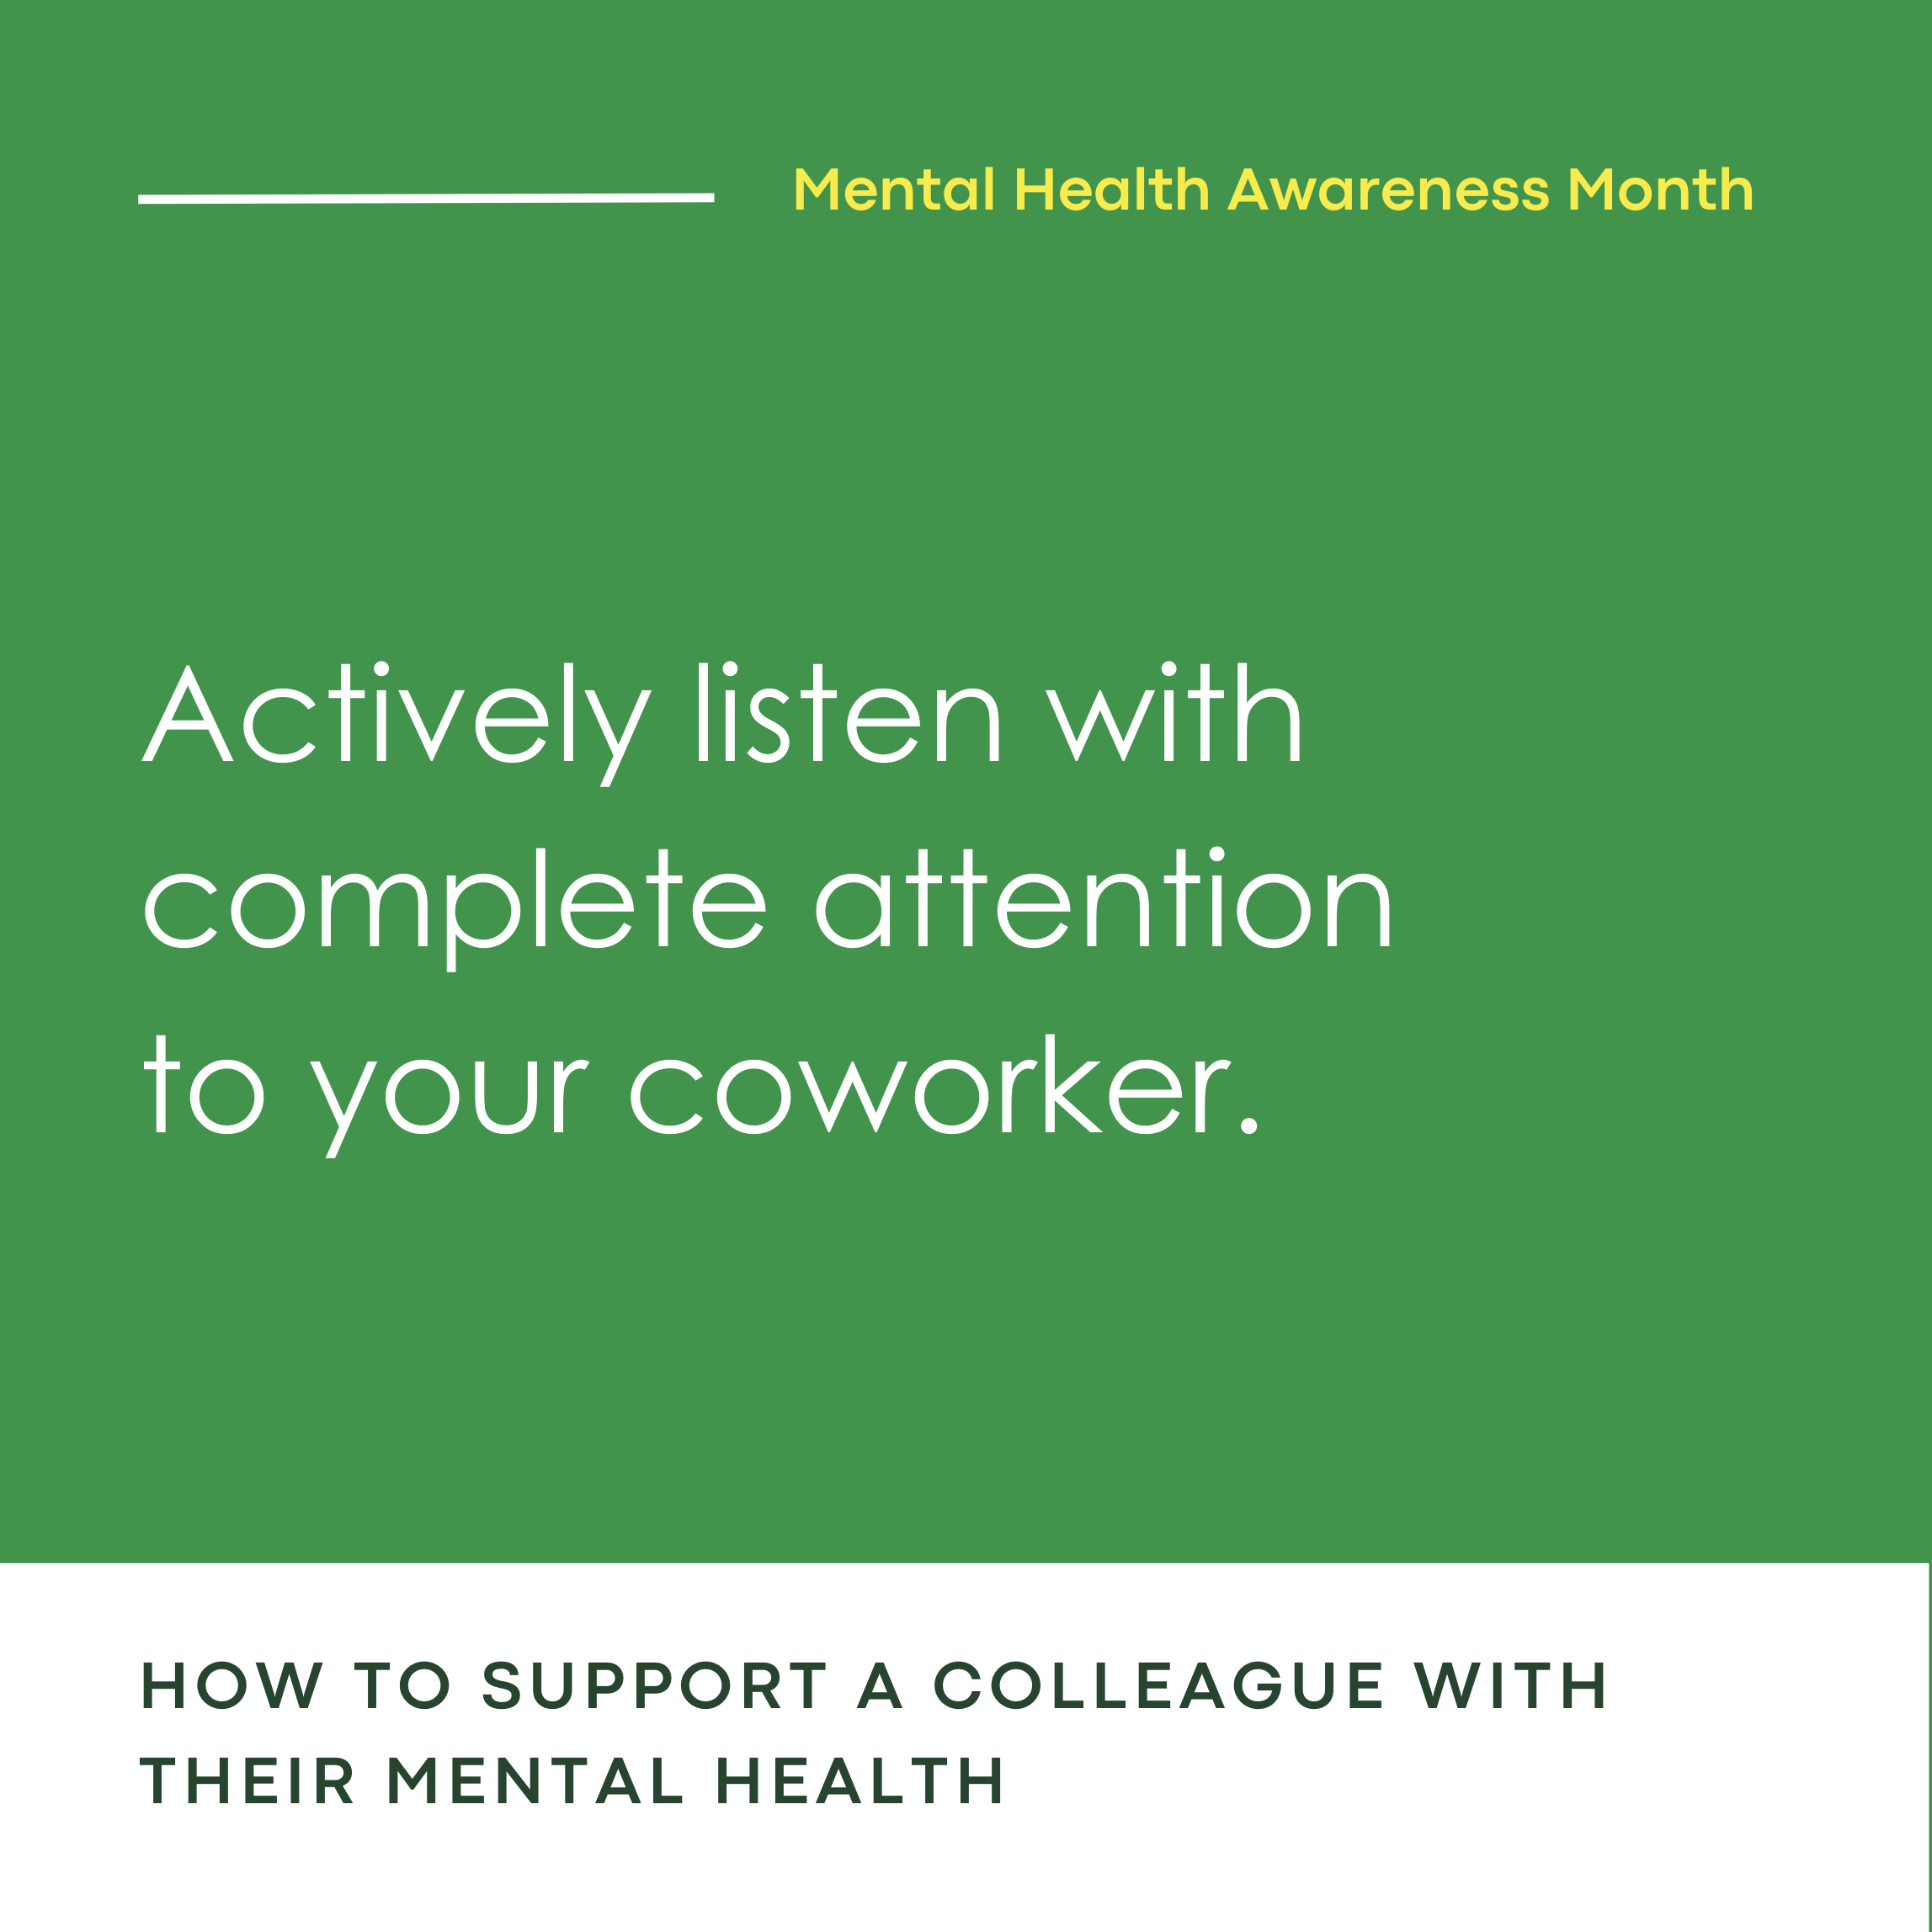 Actively listen with complete attention to your coworker